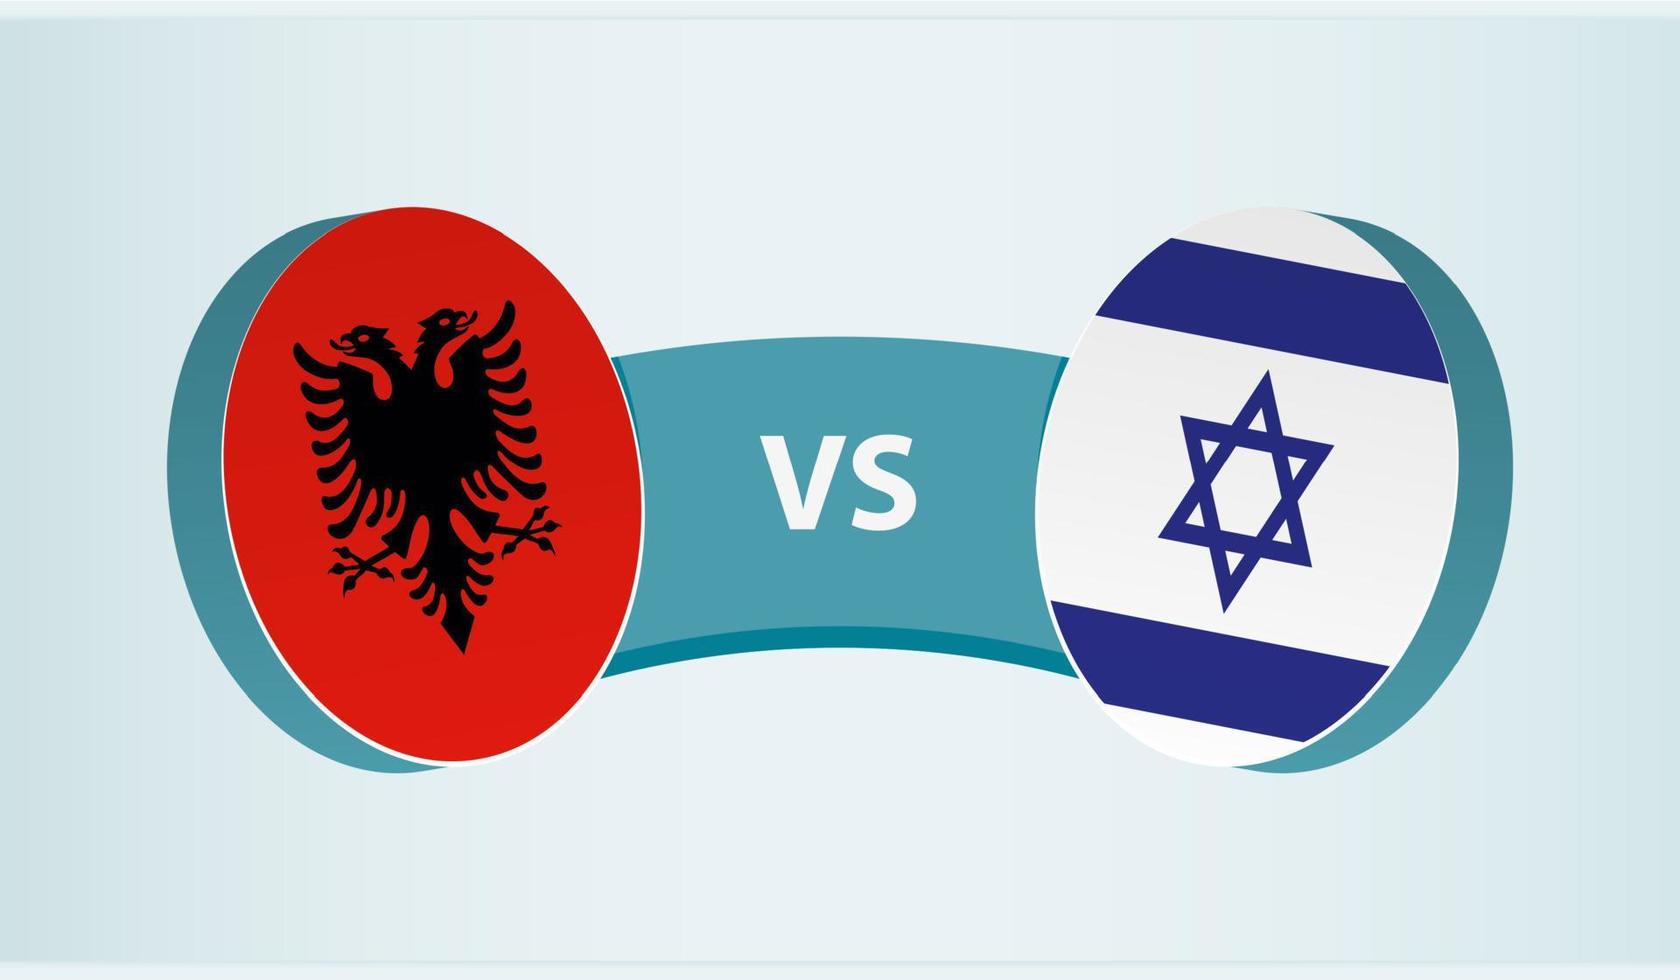 Albania versus Israel, team sports competition concept. vector